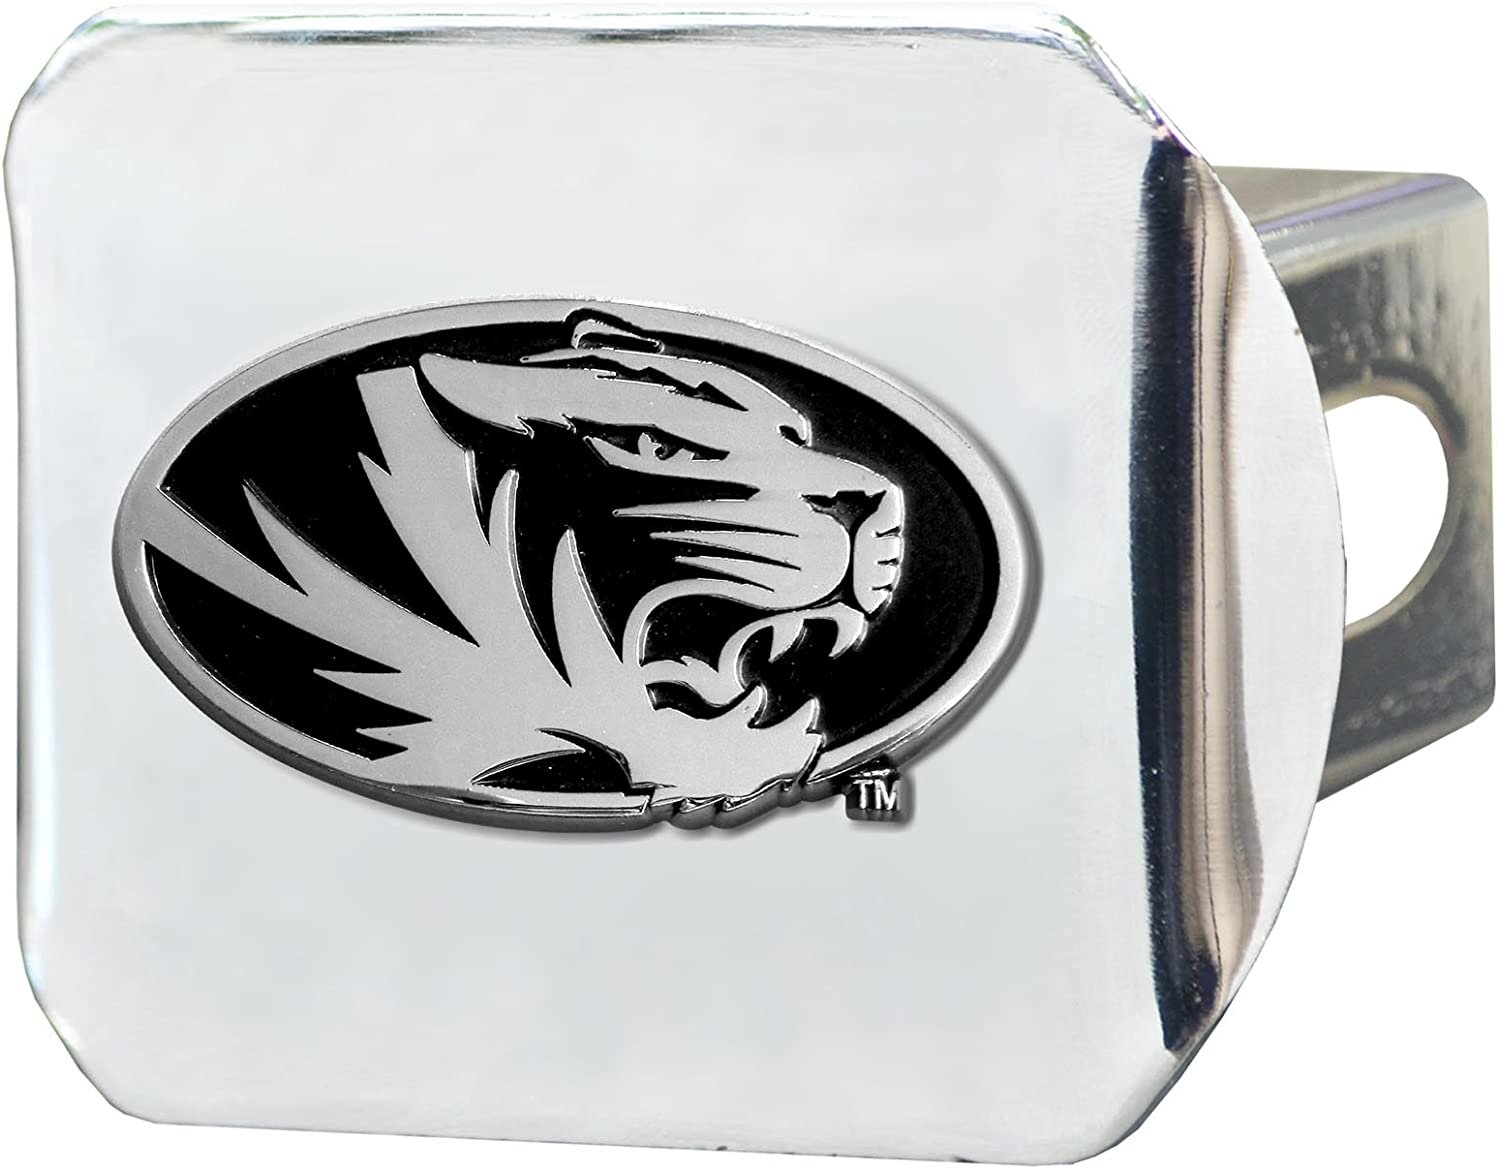 Missouri Tigers Hitch Cover Solid Metal with Raised Chrome Metal Emblem 2" Square Type III University of